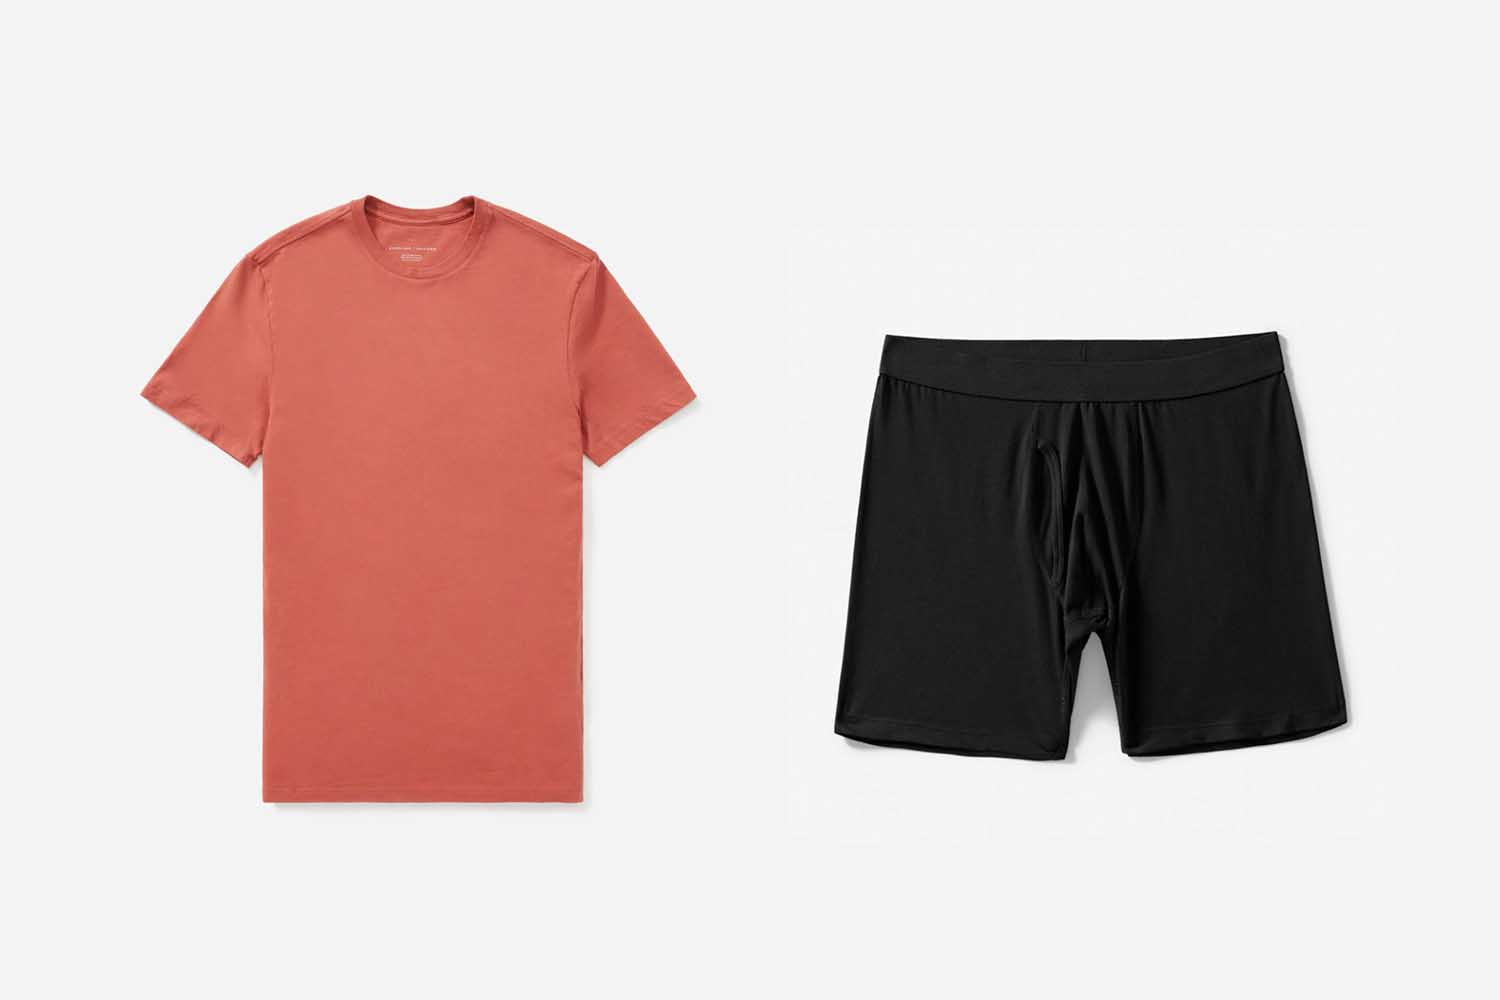 Deal: For One Week Only, Everlane's Offering a No-Brainer T-Shirt Bundle